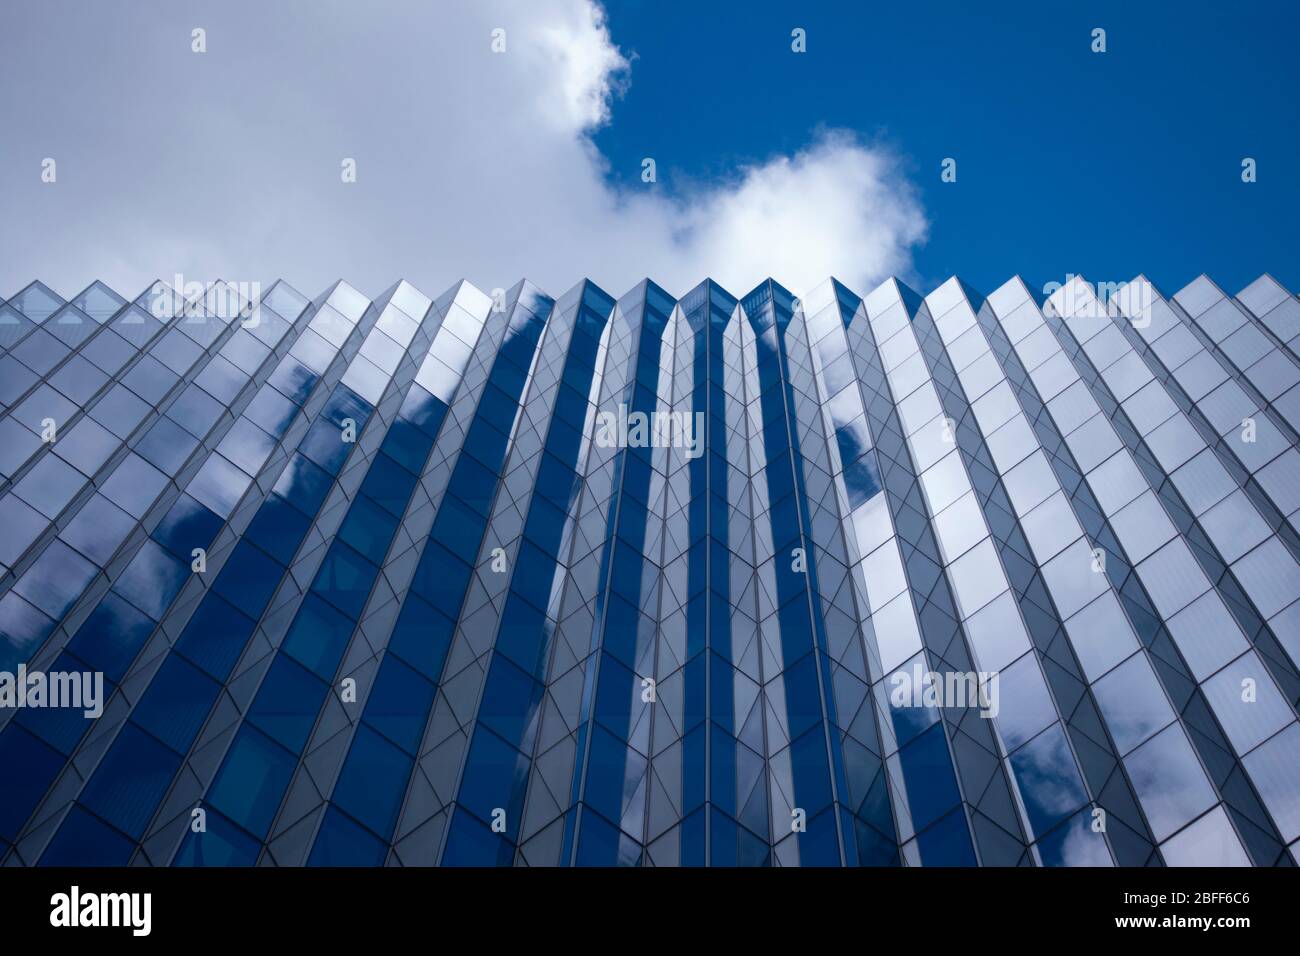 Abstract architecture reflections and angles set against a blue sky framed for geometry Stock Photo